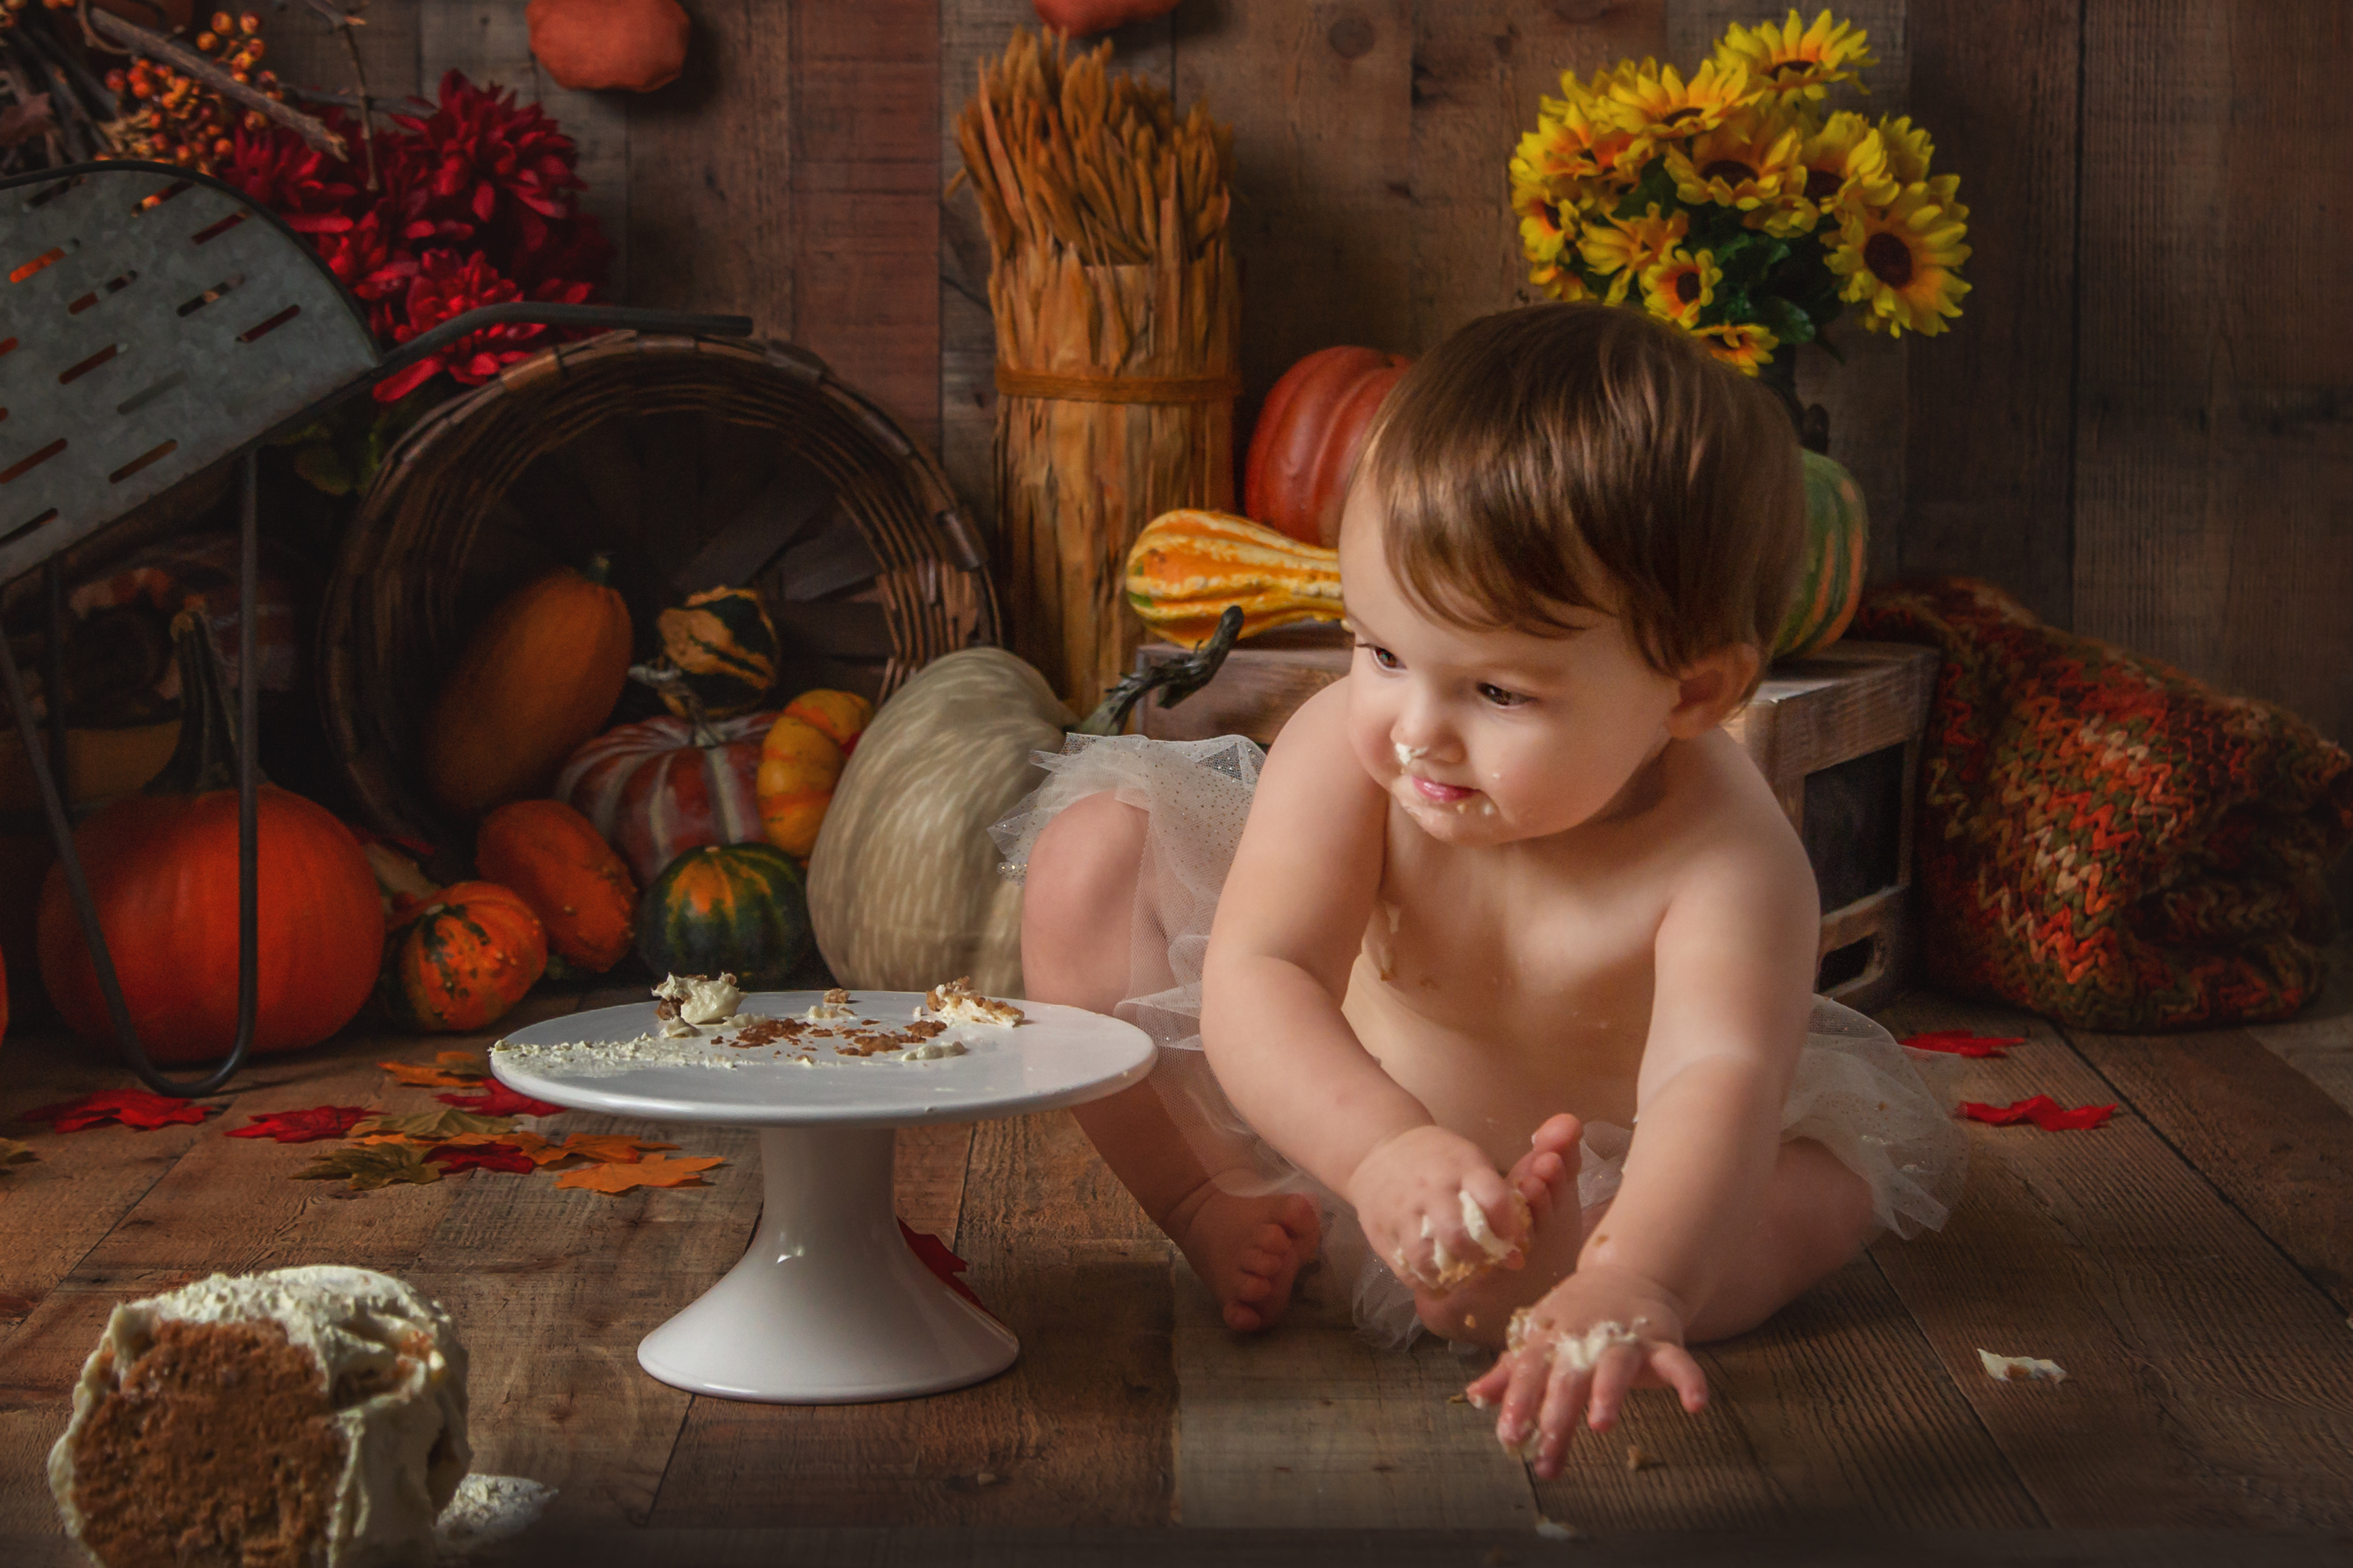 Birthday Cake Smash Session, sisters, siblings, girls, brother, birthday, Studio Sitter Session, Watch Me Grow, Baby, Child, Photography, Session, Casi Ann Photography, studio, 12 month, milestone, sitter, 1 year, tutu, vines, pumpkins, Ingleside, Machesney Park, Illinois, portrait, kids